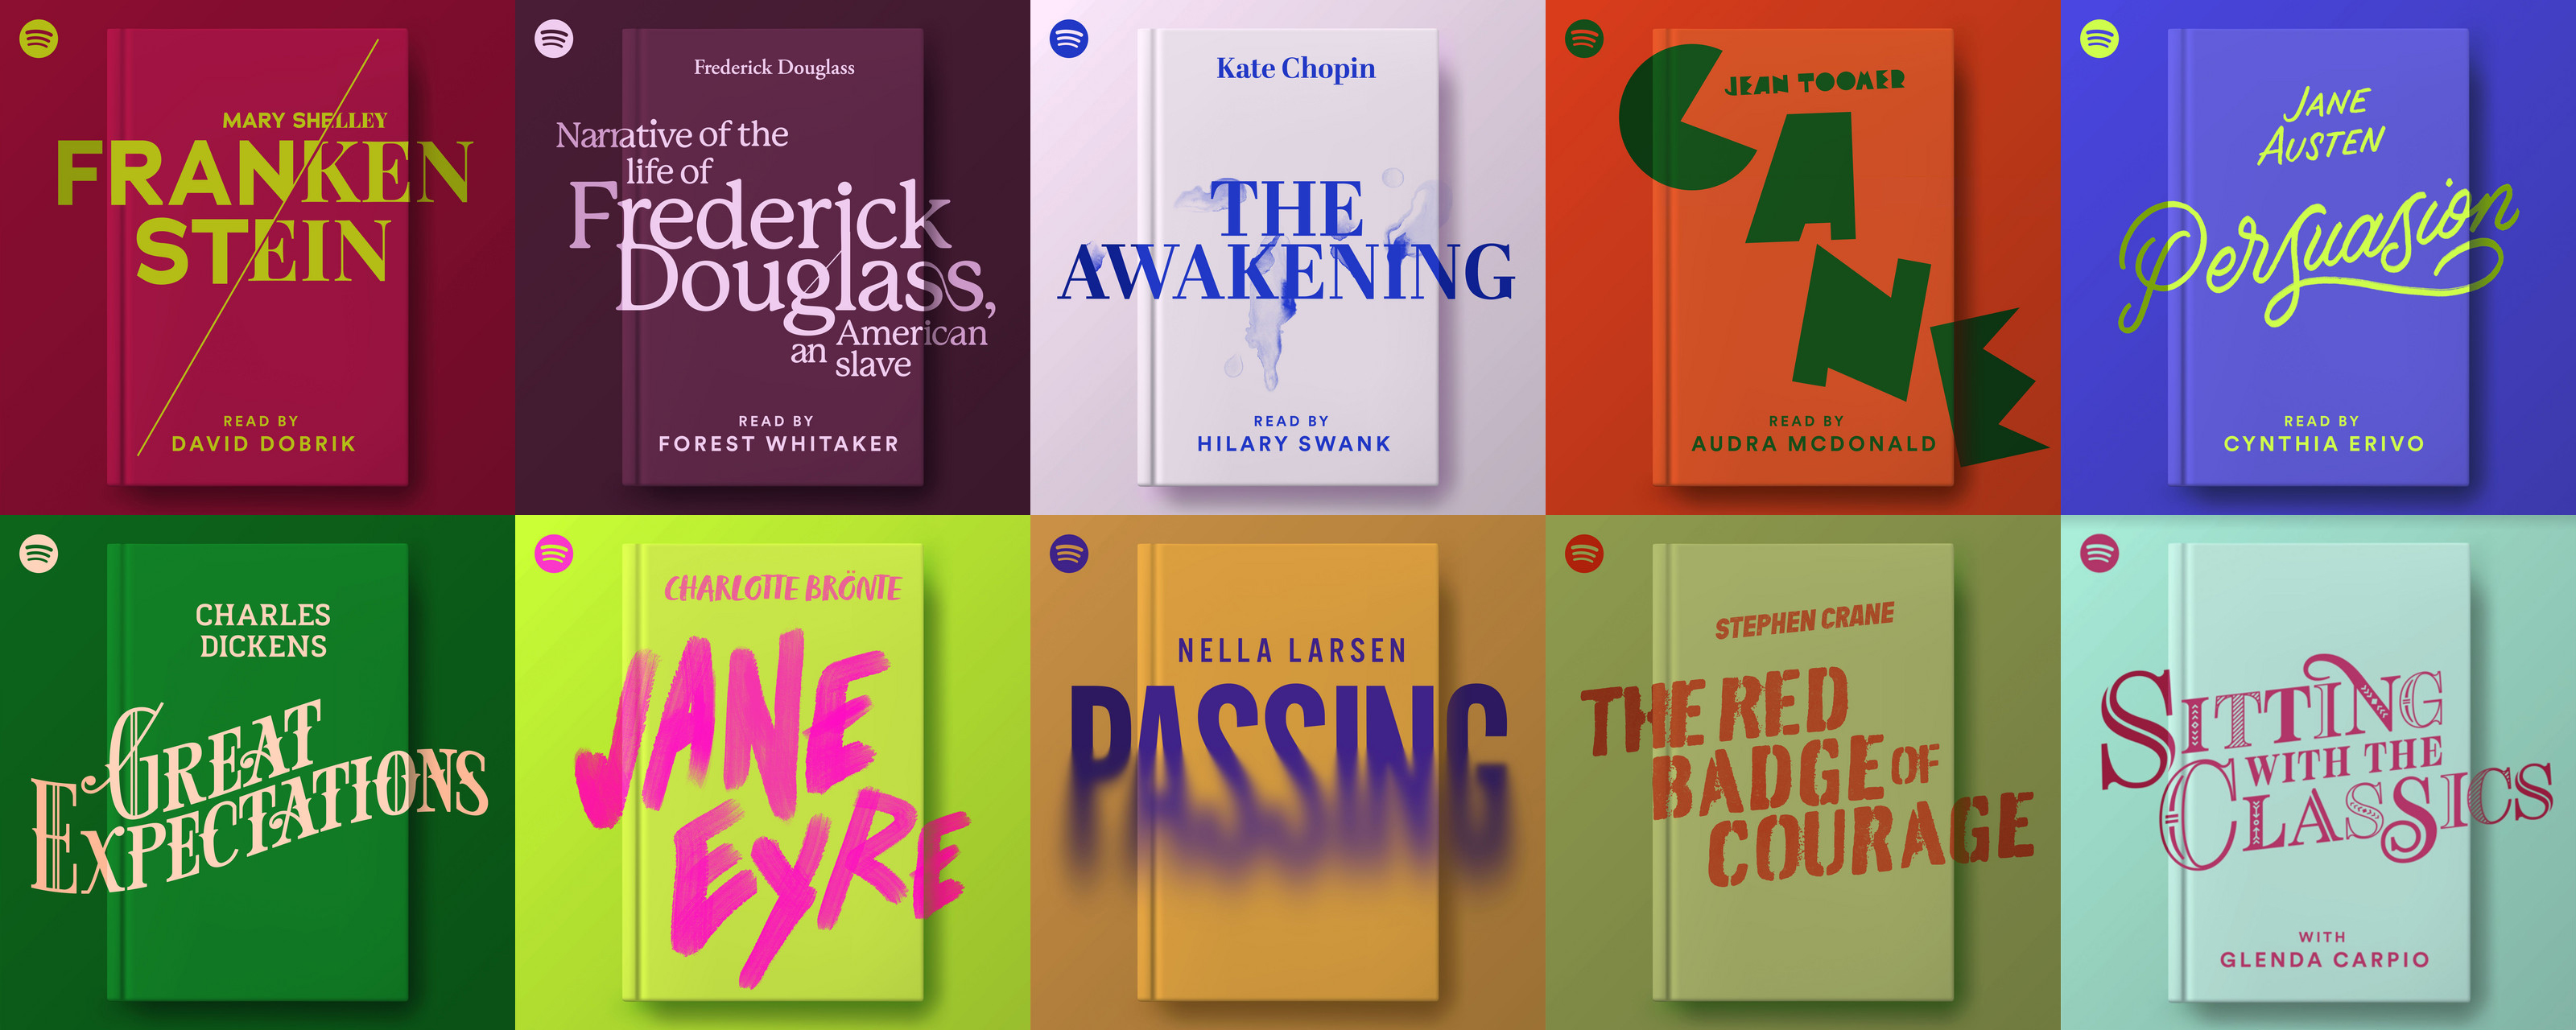 Spotify continue experimenting with audiobooks, adding nine classic novels available for free